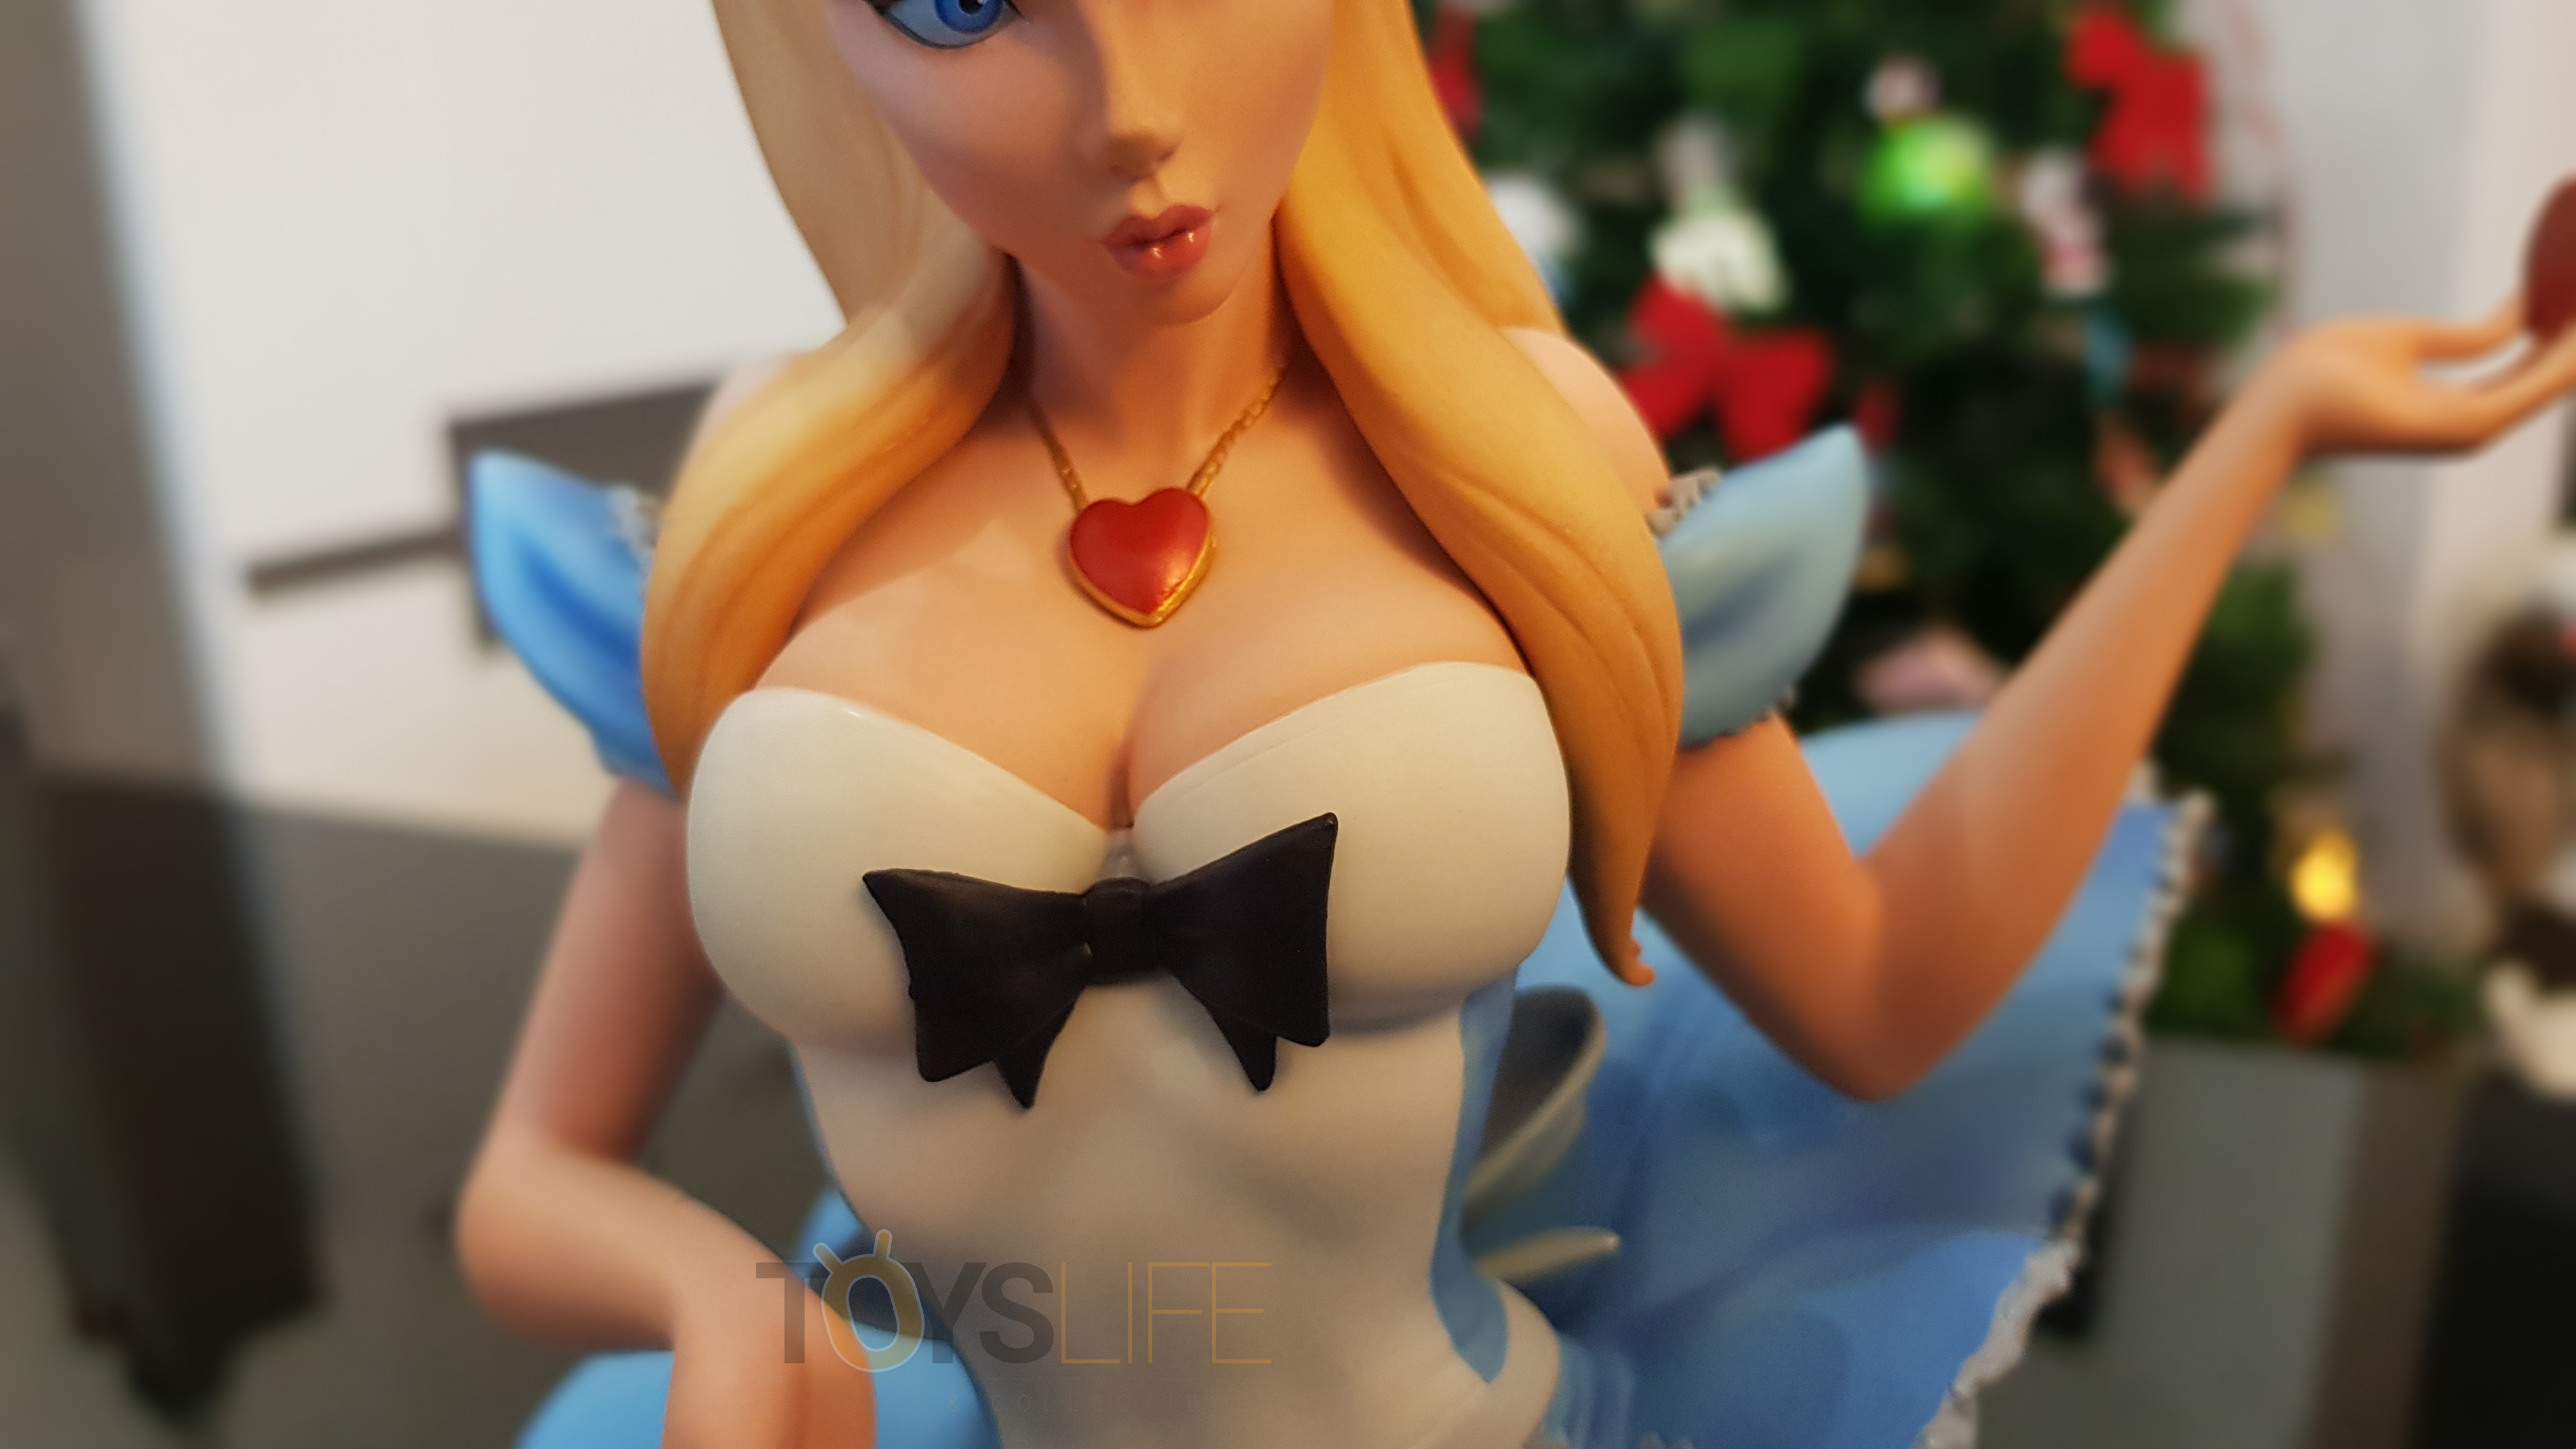 sideshow-fairytale-fantasies-jscampbell-alice-exclusive-statue-toyslife-review-12